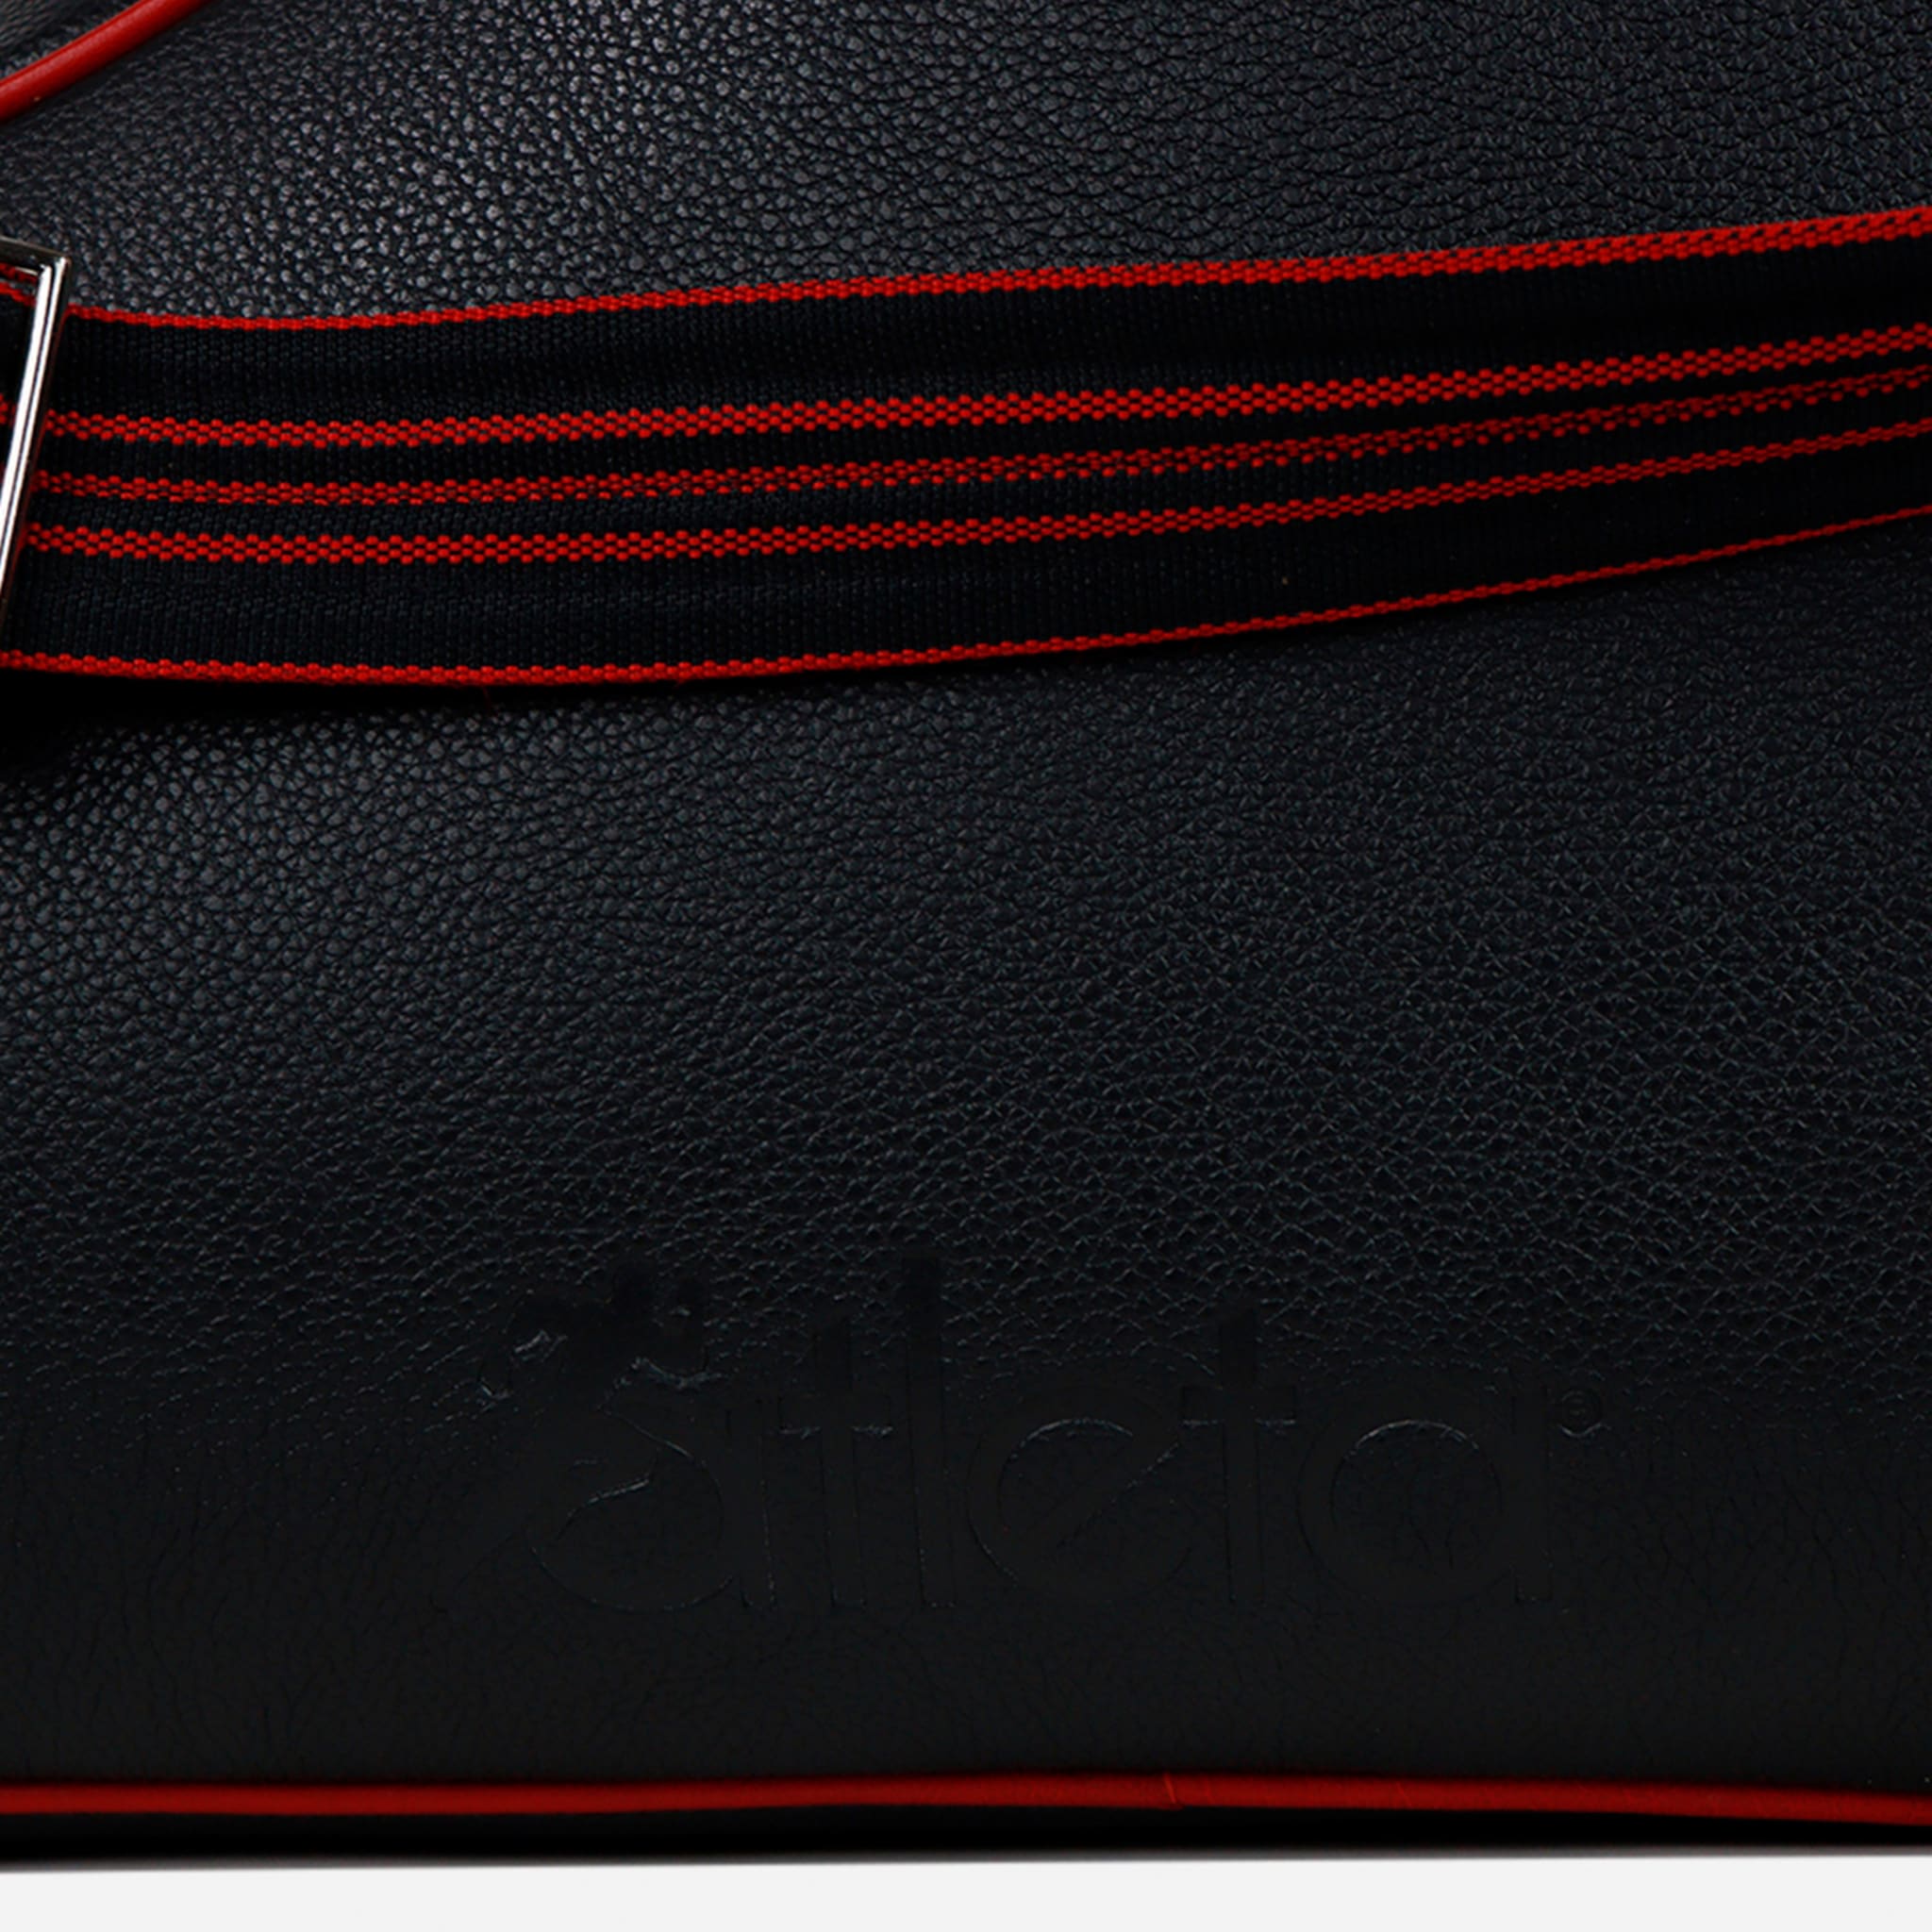 Red and Black Tennis Bag - Alternative view 4